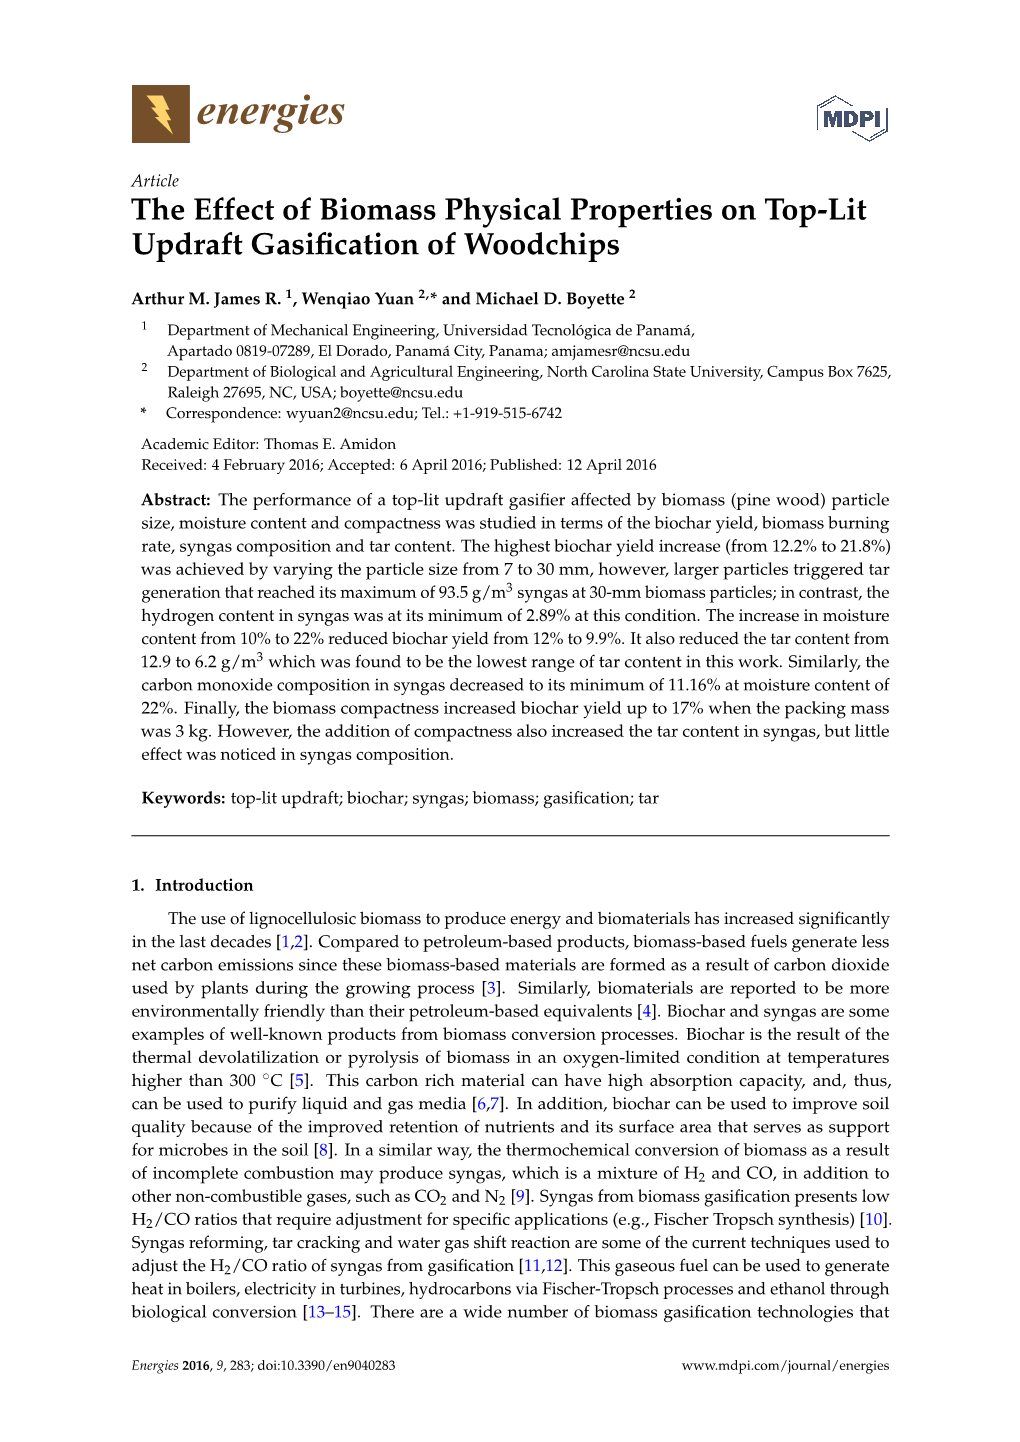 The Effect of Biomass Physical Properties on Top-Lit Updraft Gasiﬁcation of Woodchips